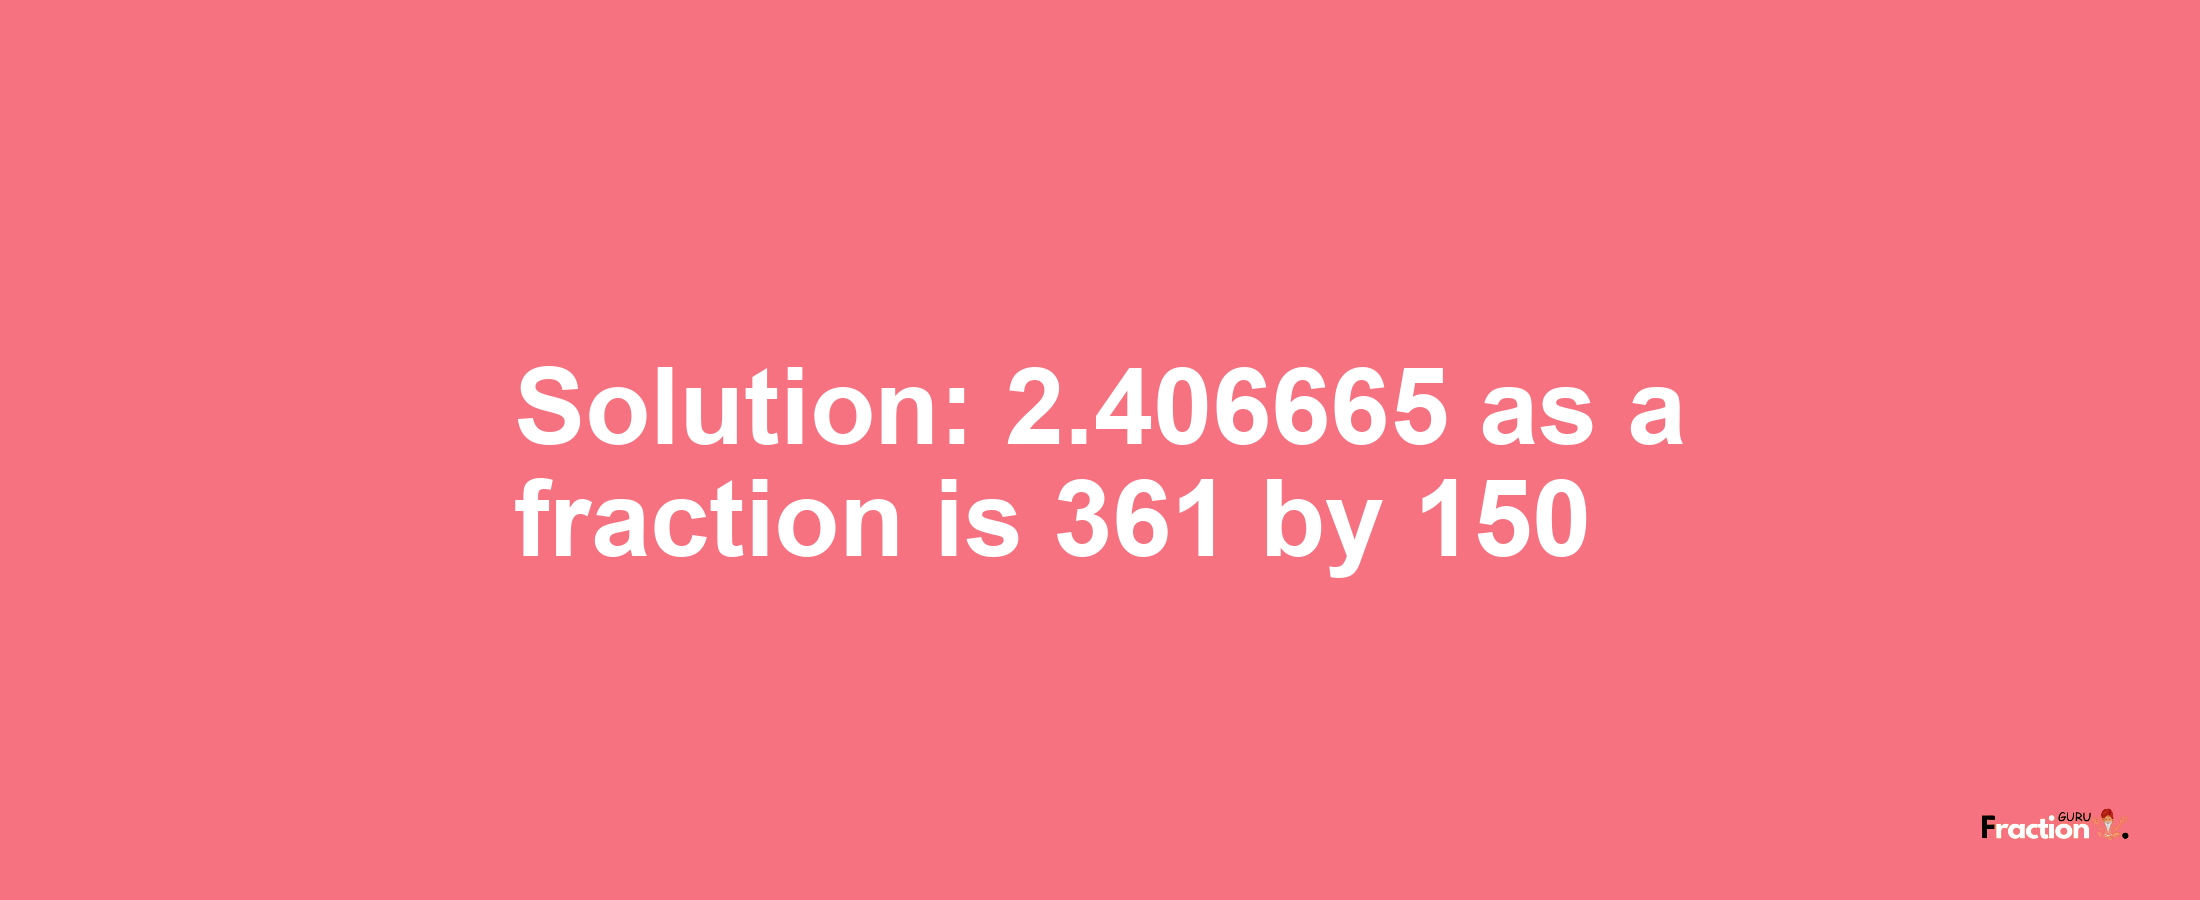 Solution:2.406665 as a fraction is 361/150